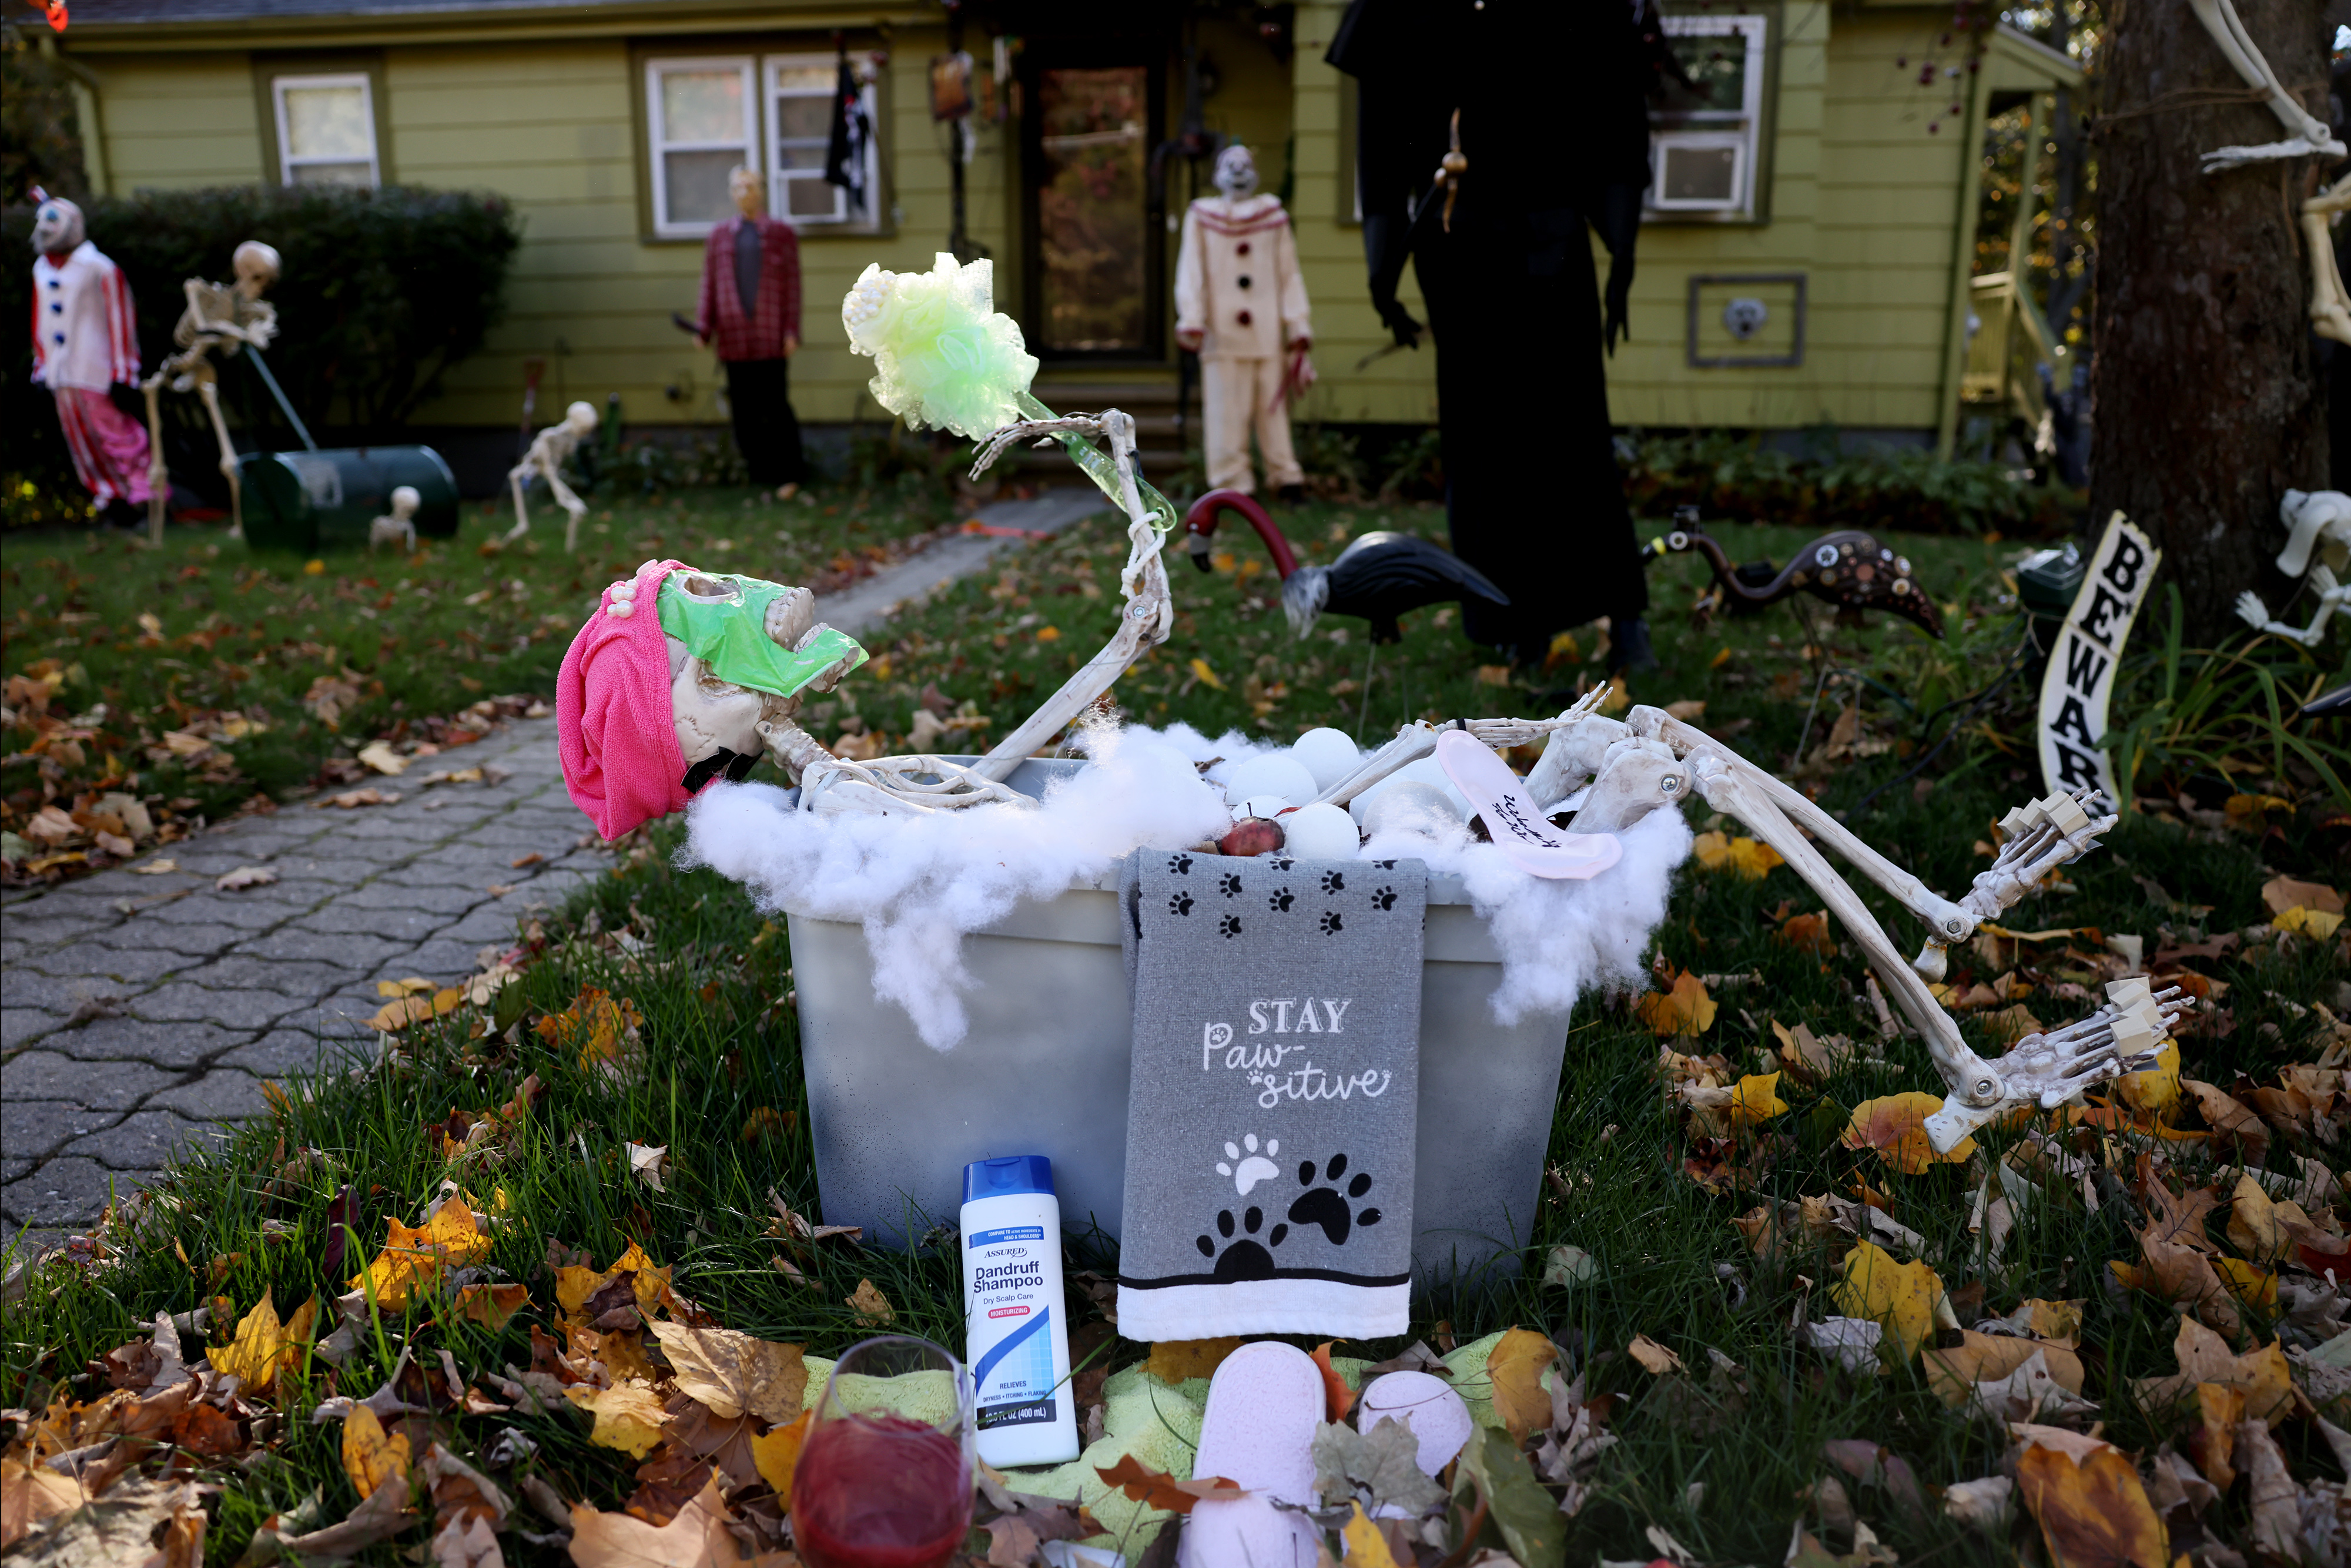 Turbocharged Halloween decorations have taken over yards around ...